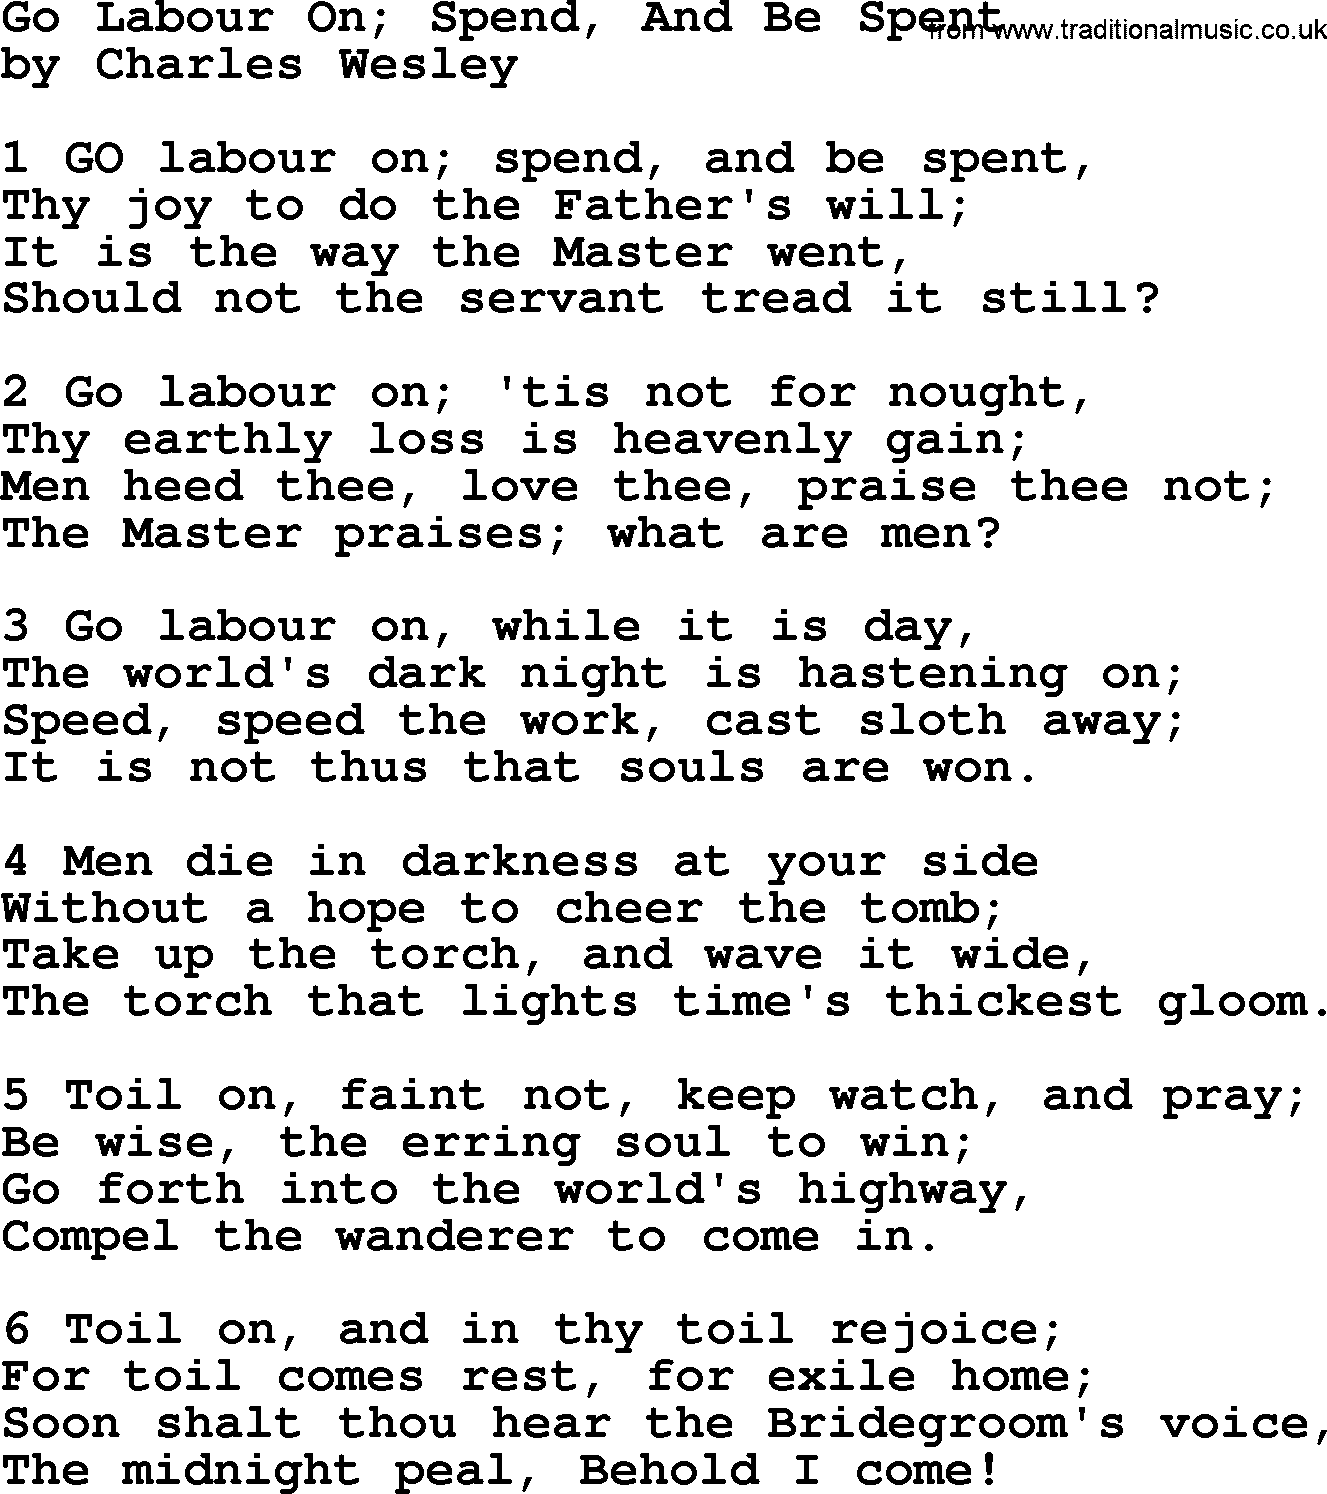 Charles Wesley hymn: Go Labour On; Spend, And Be Spent, lyrics